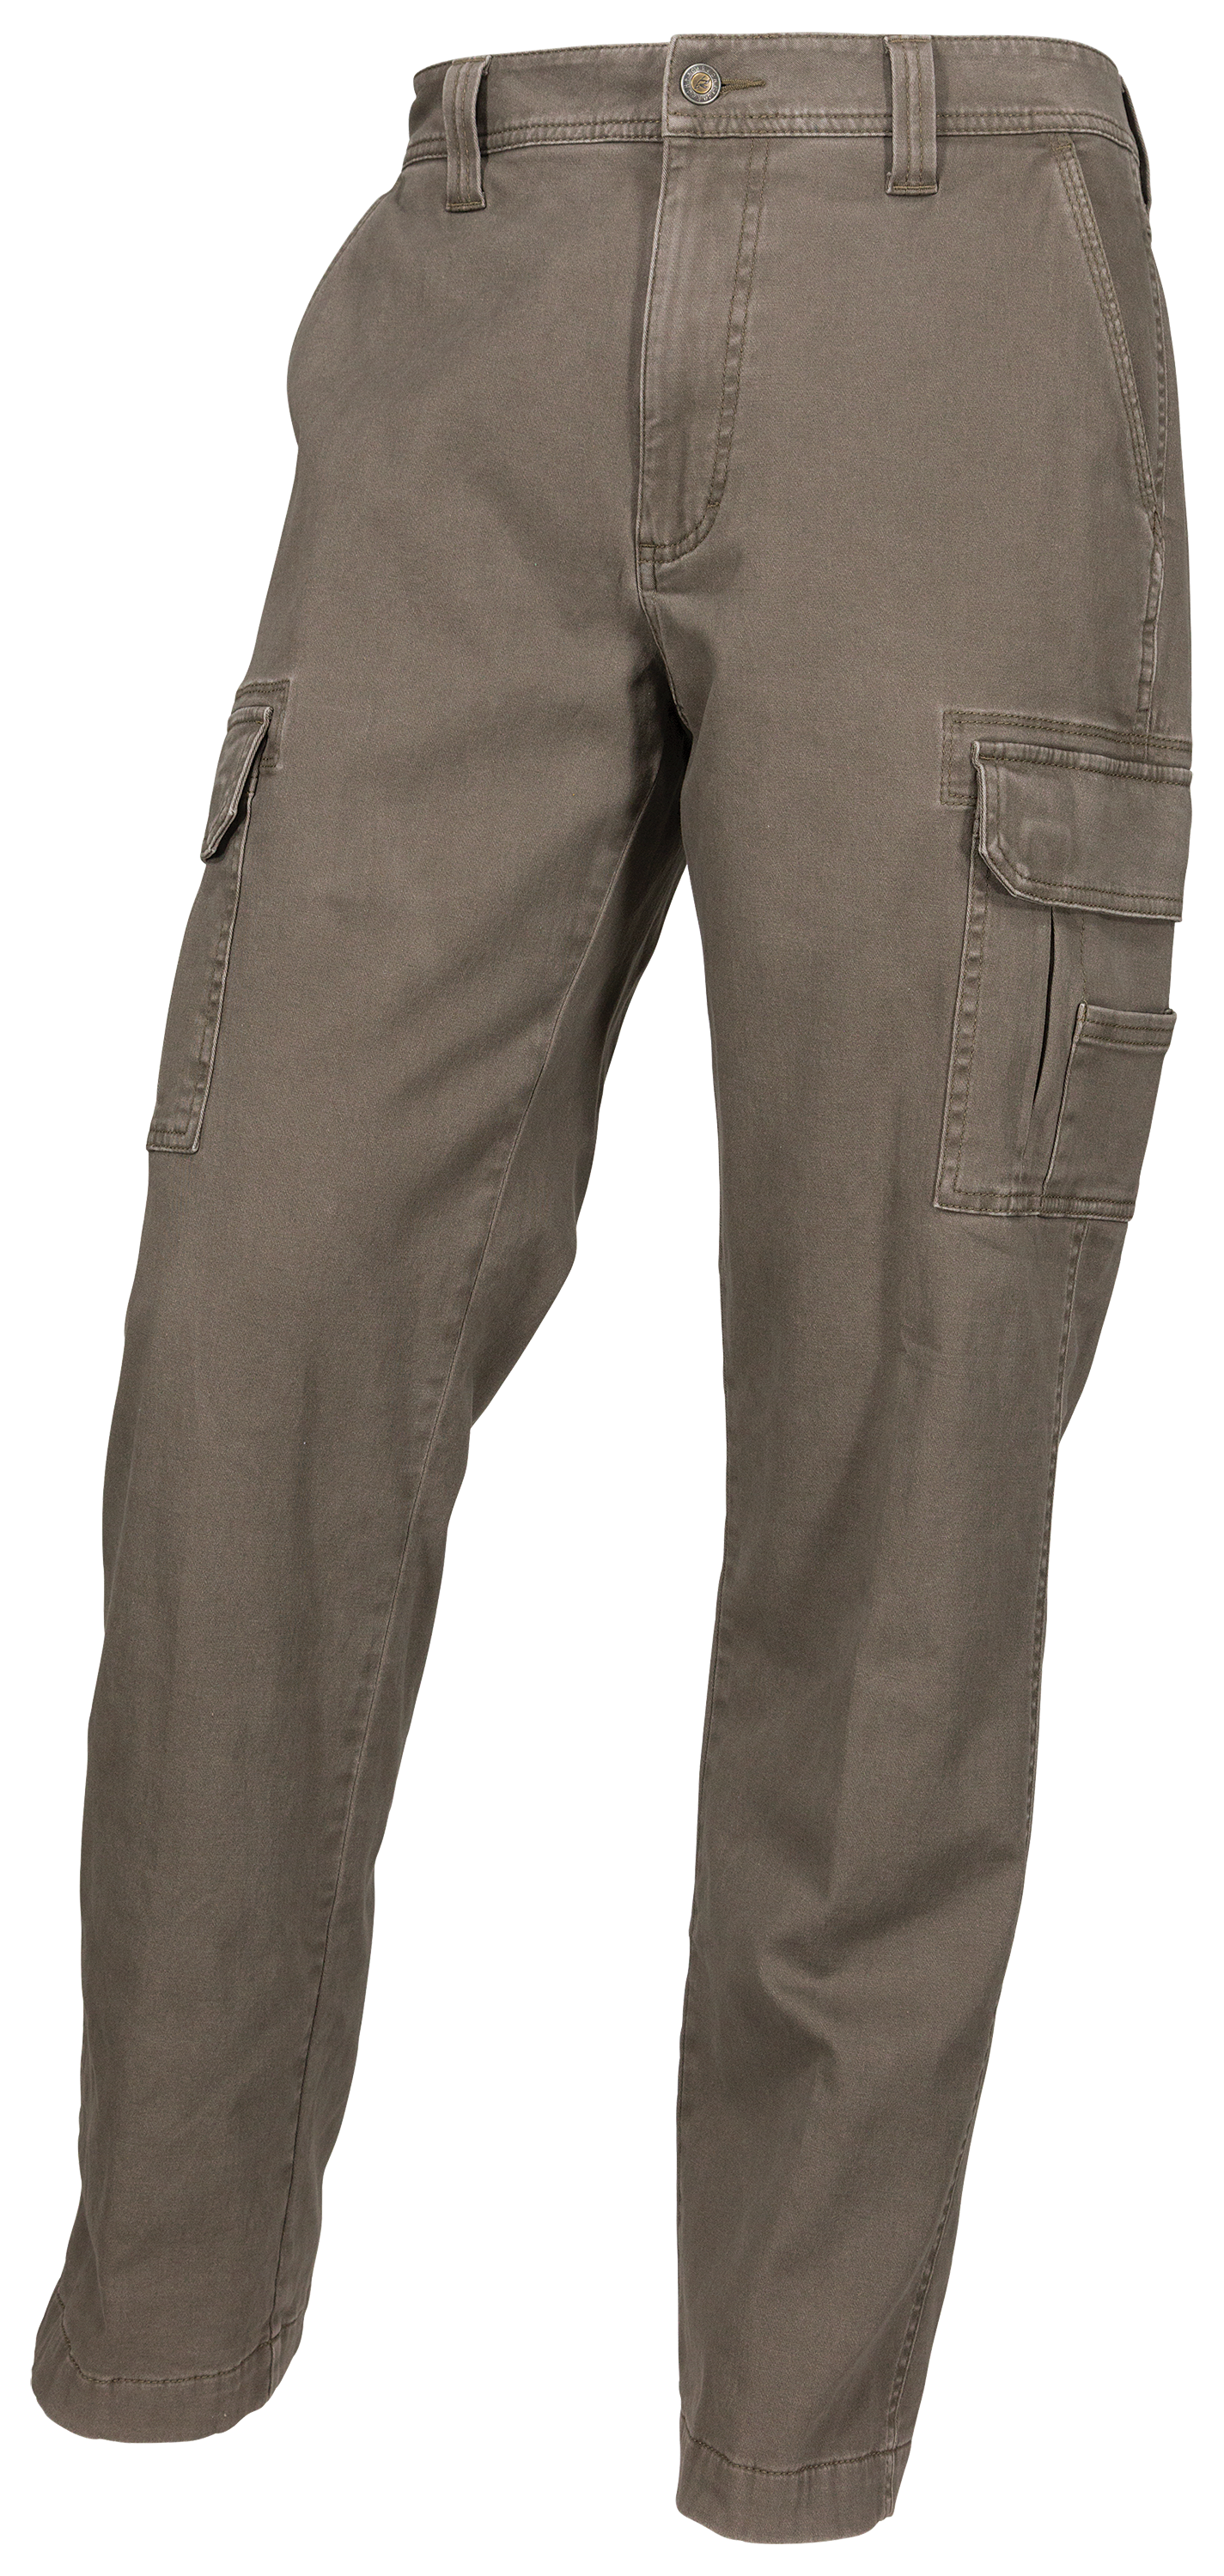 Duluth Trading Fire Hose Cargo Pants Fleece Lined 36x30 Relaxed Fit Brown  Clean